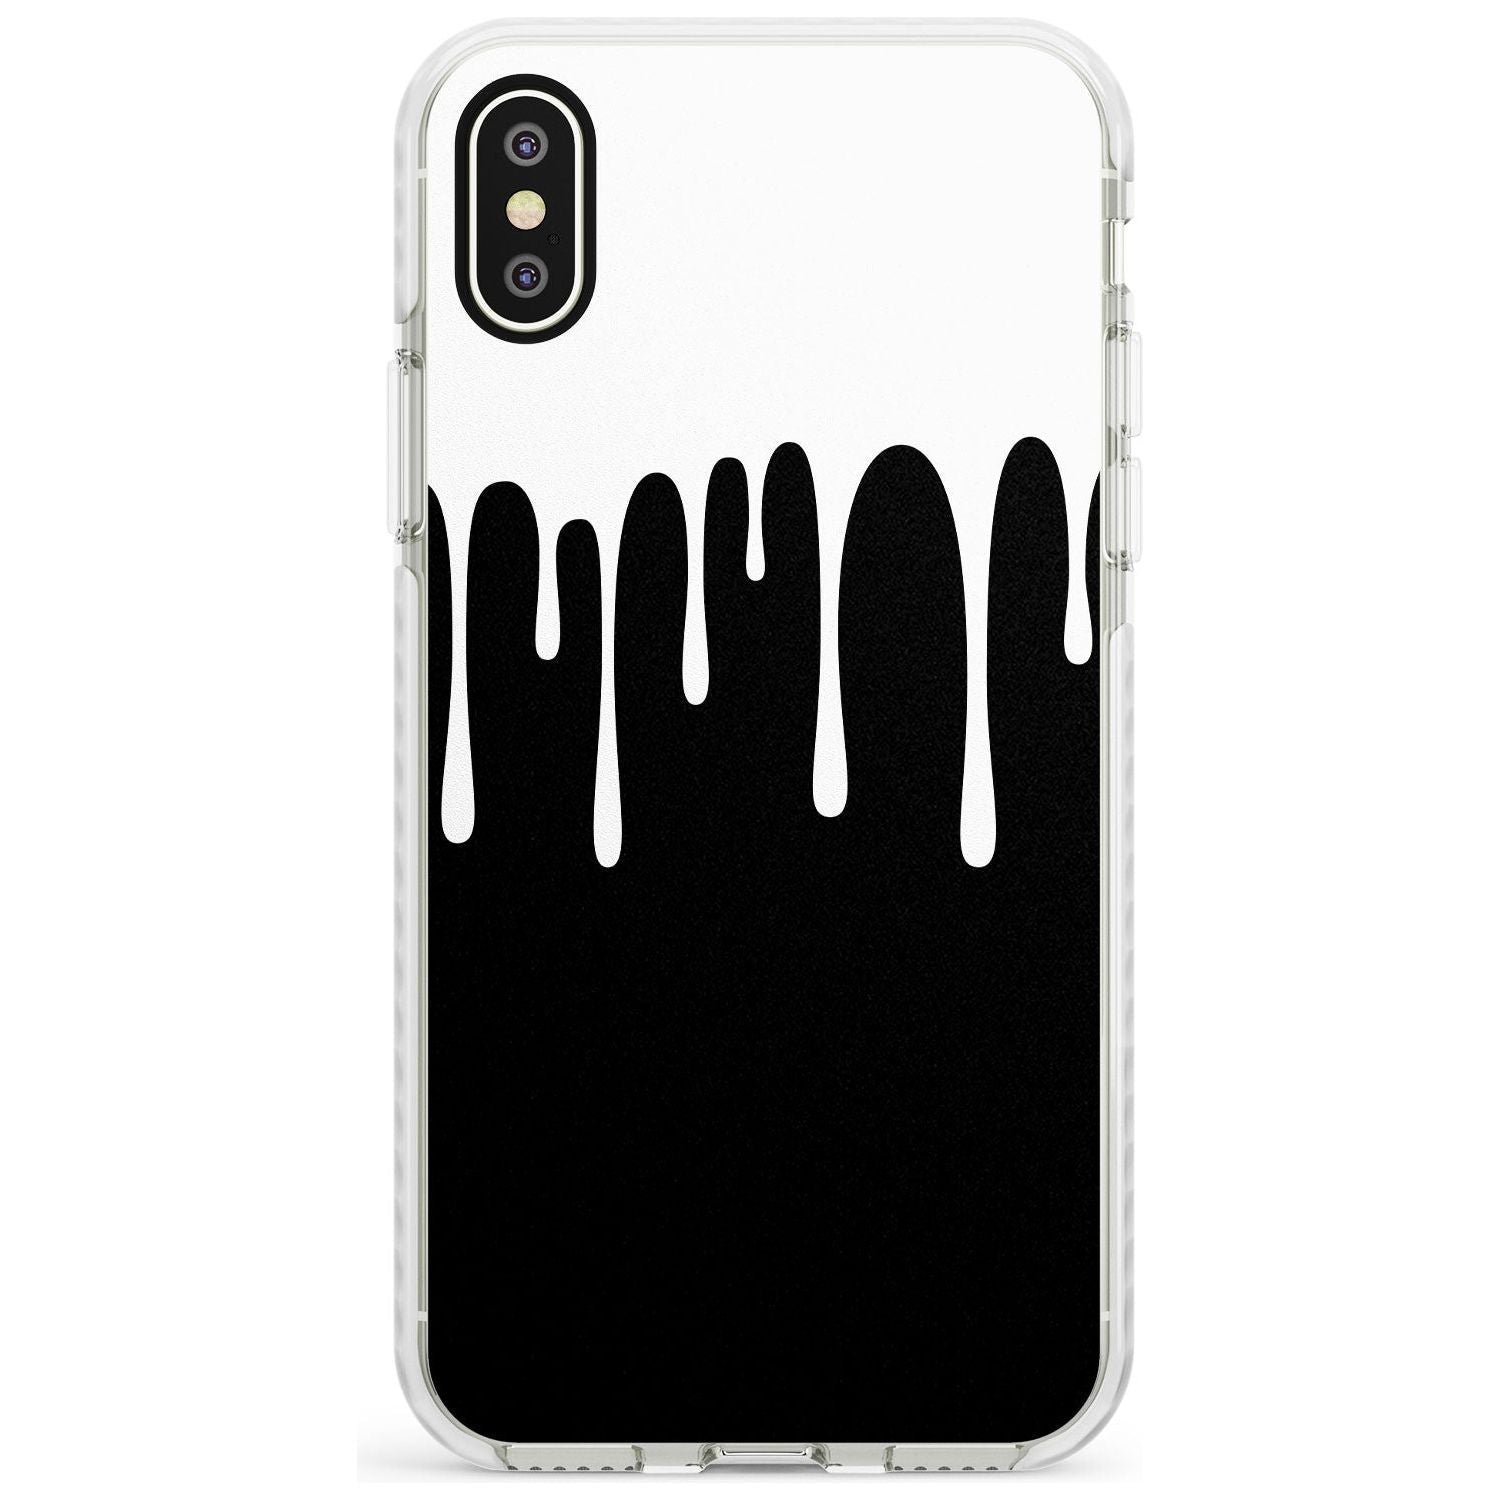 Melted Effect: White & Black iPhone Case Impact Phone Case Warehouse X XS Max XR